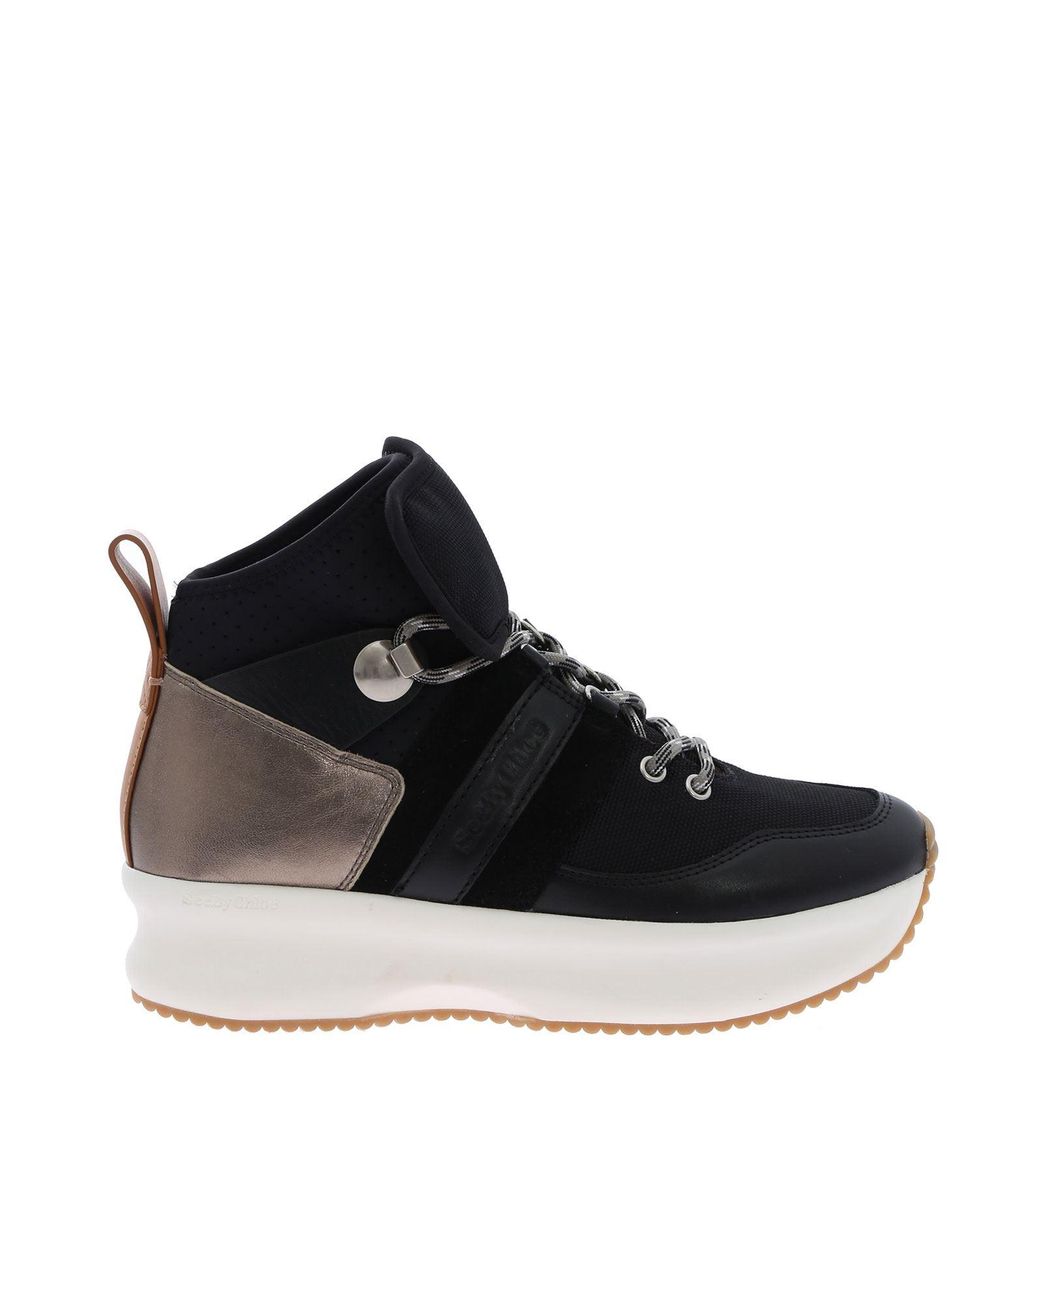 See By Chloé Black Leather Atena Sneakers - Lyst